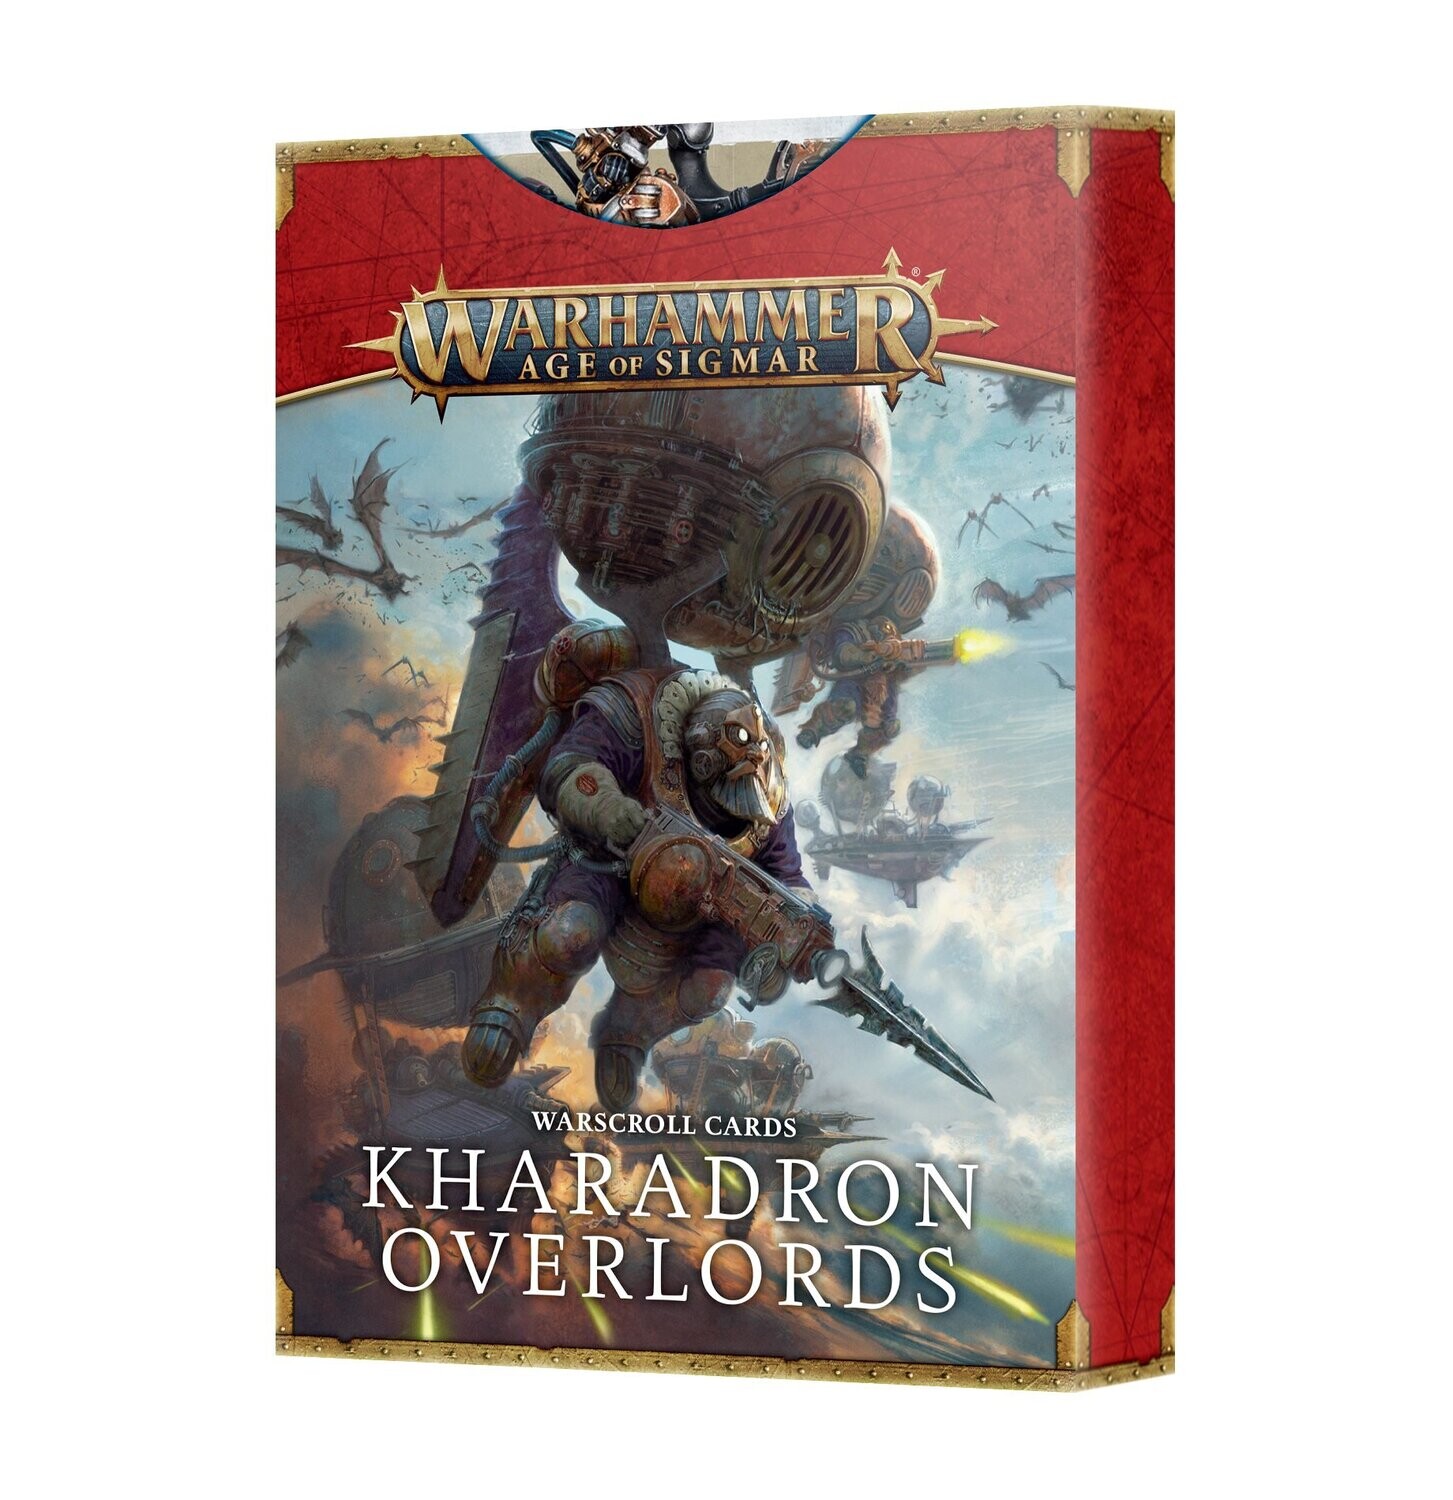 Warscroll Cards: Kharadron Overlords (Englisch) - Warhammer Age of Sigmar - Games Workshop